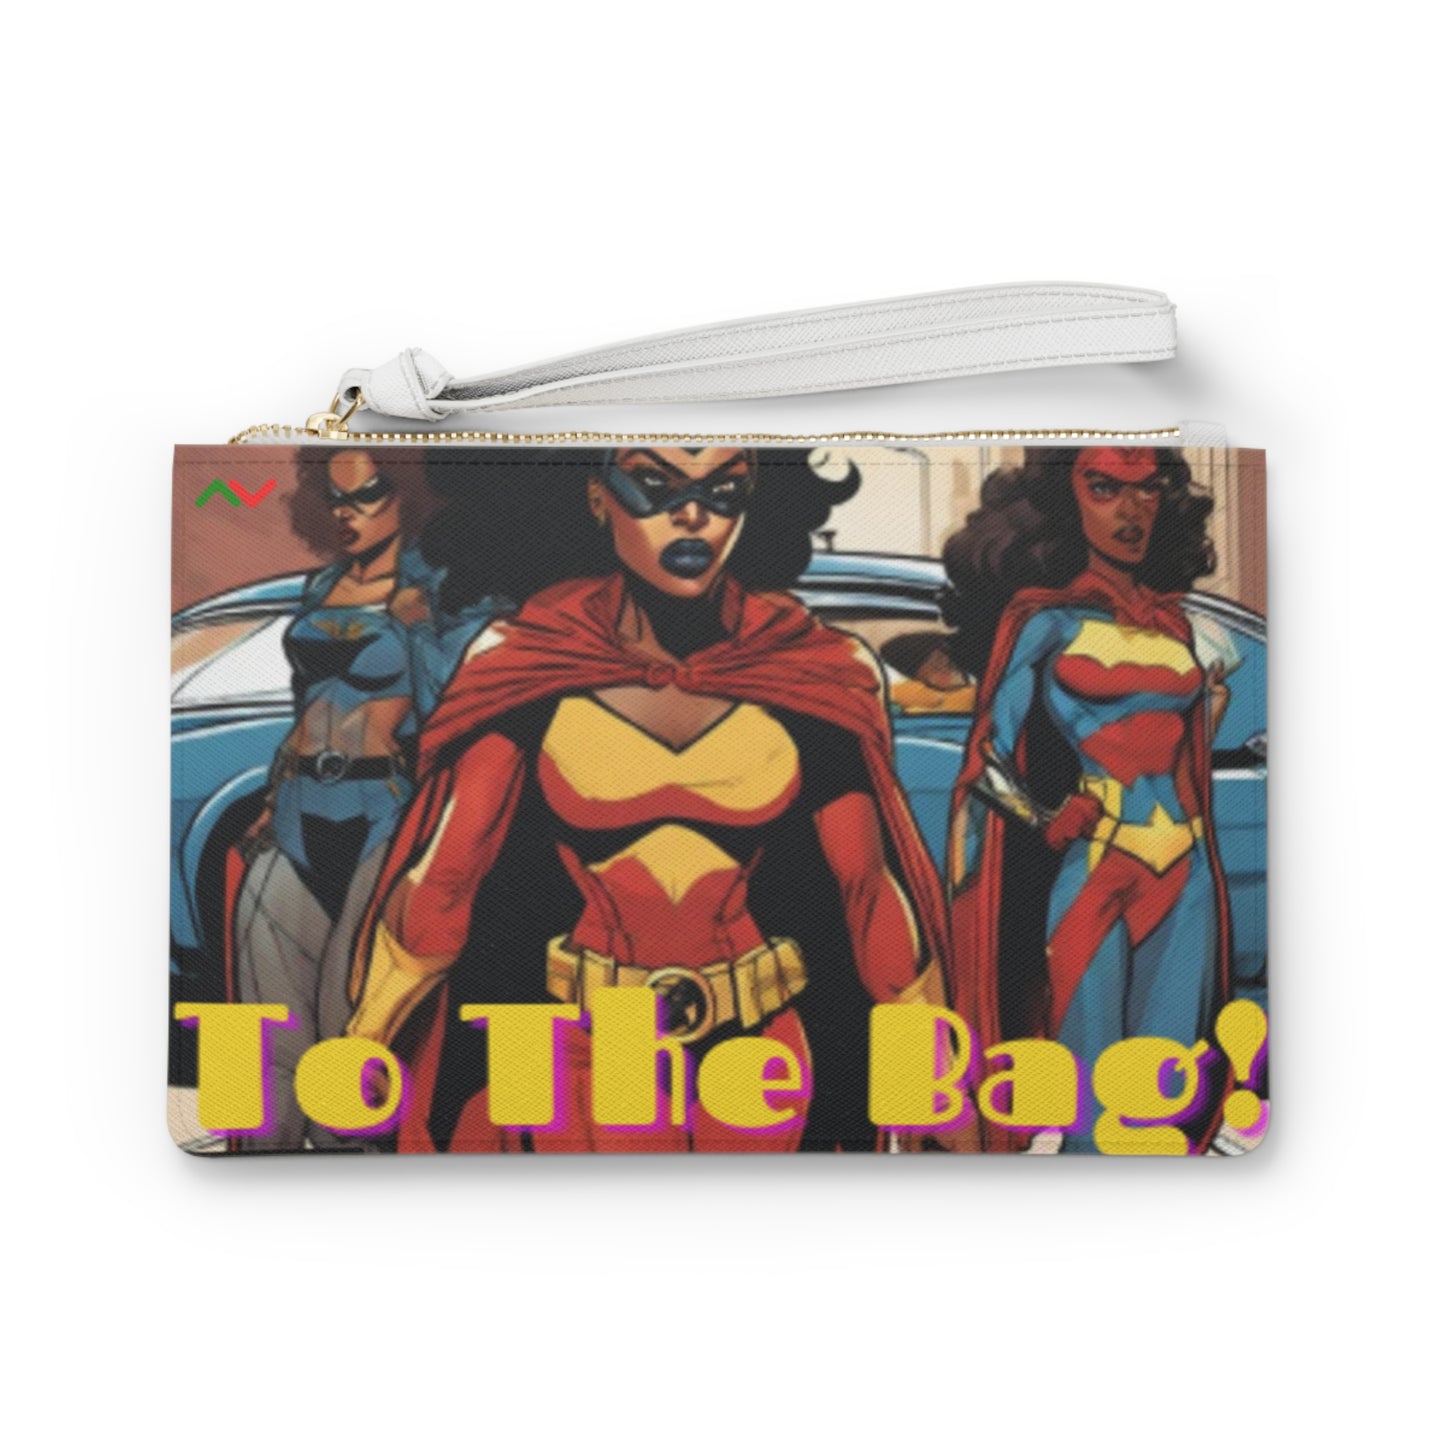 “To The Bag!”: Issue 2 Clutch